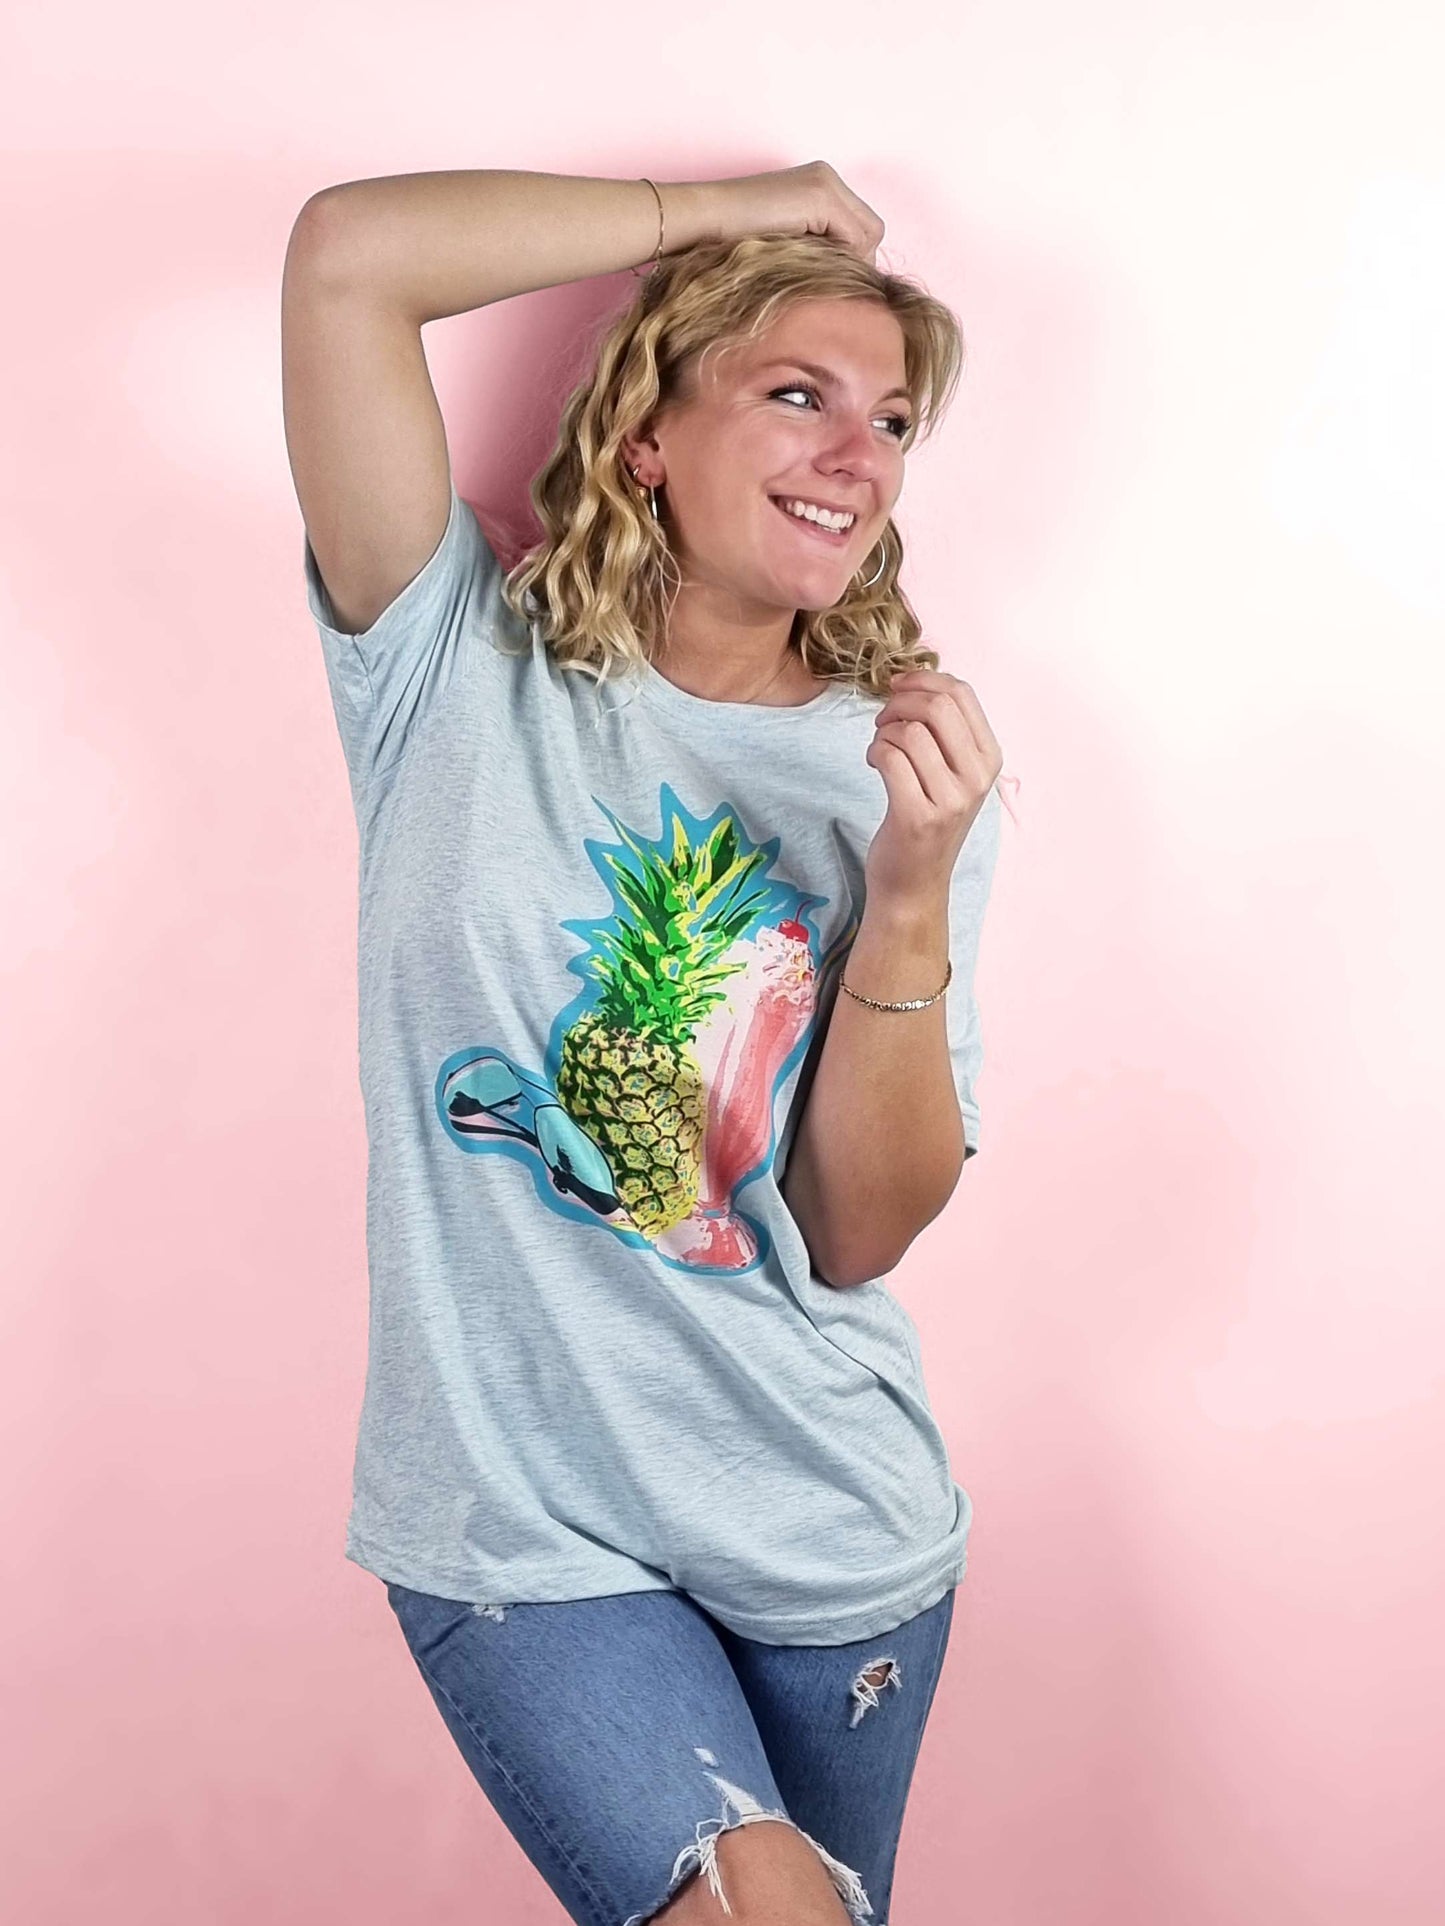 a tropical t-shirt featuring a pineapple, a cocktail and sunglasses. The ultimate bright and colourful summertime t-shirt in light blue